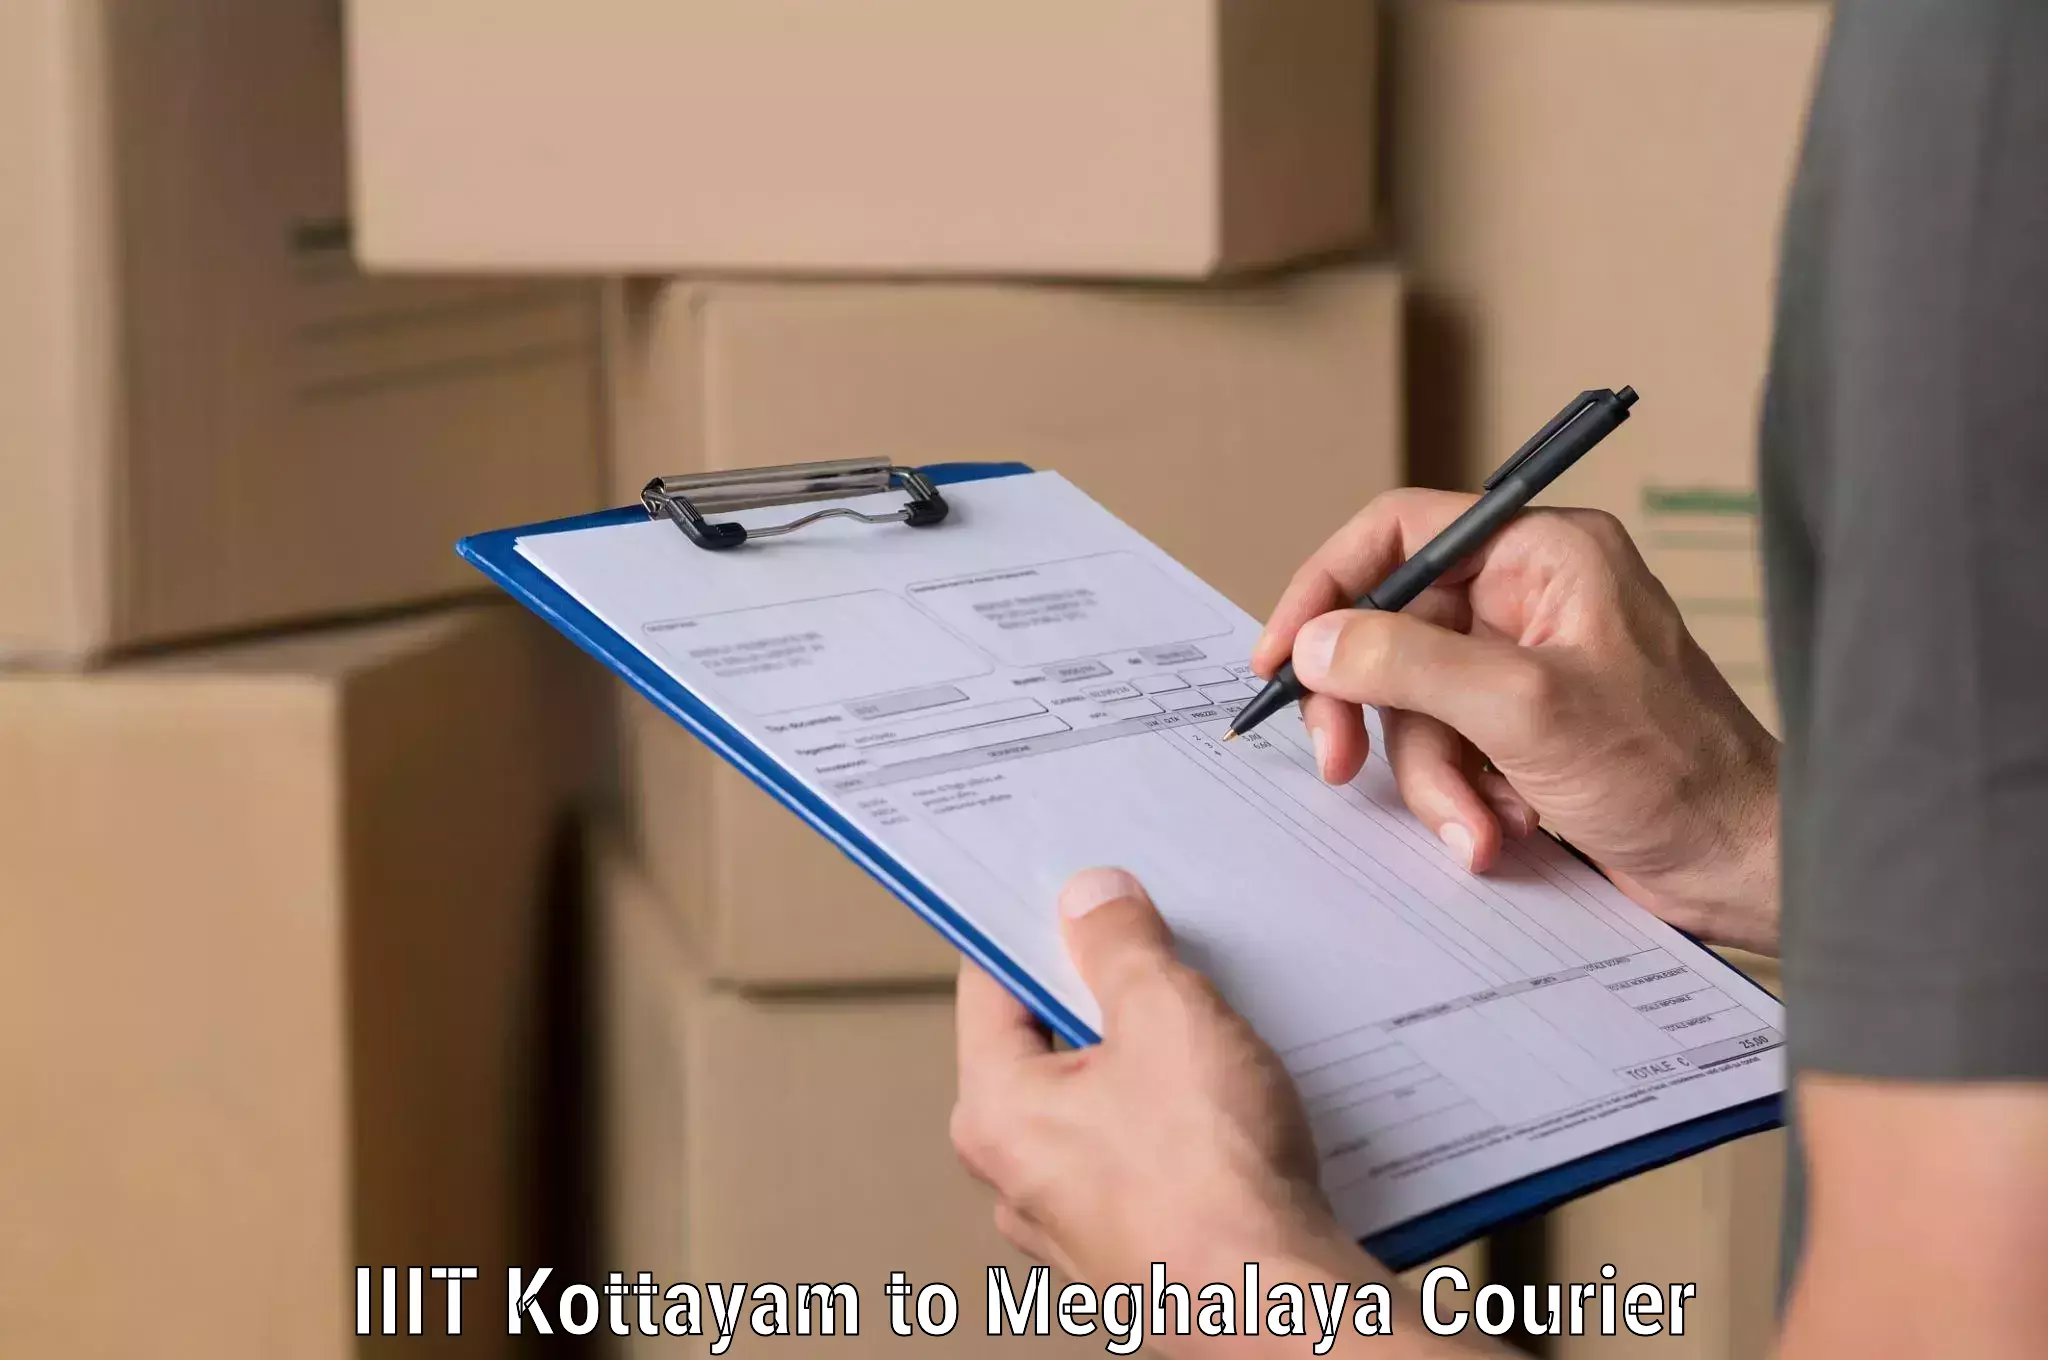 Courier service comparison in IIIT Kottayam to Dkhiah West